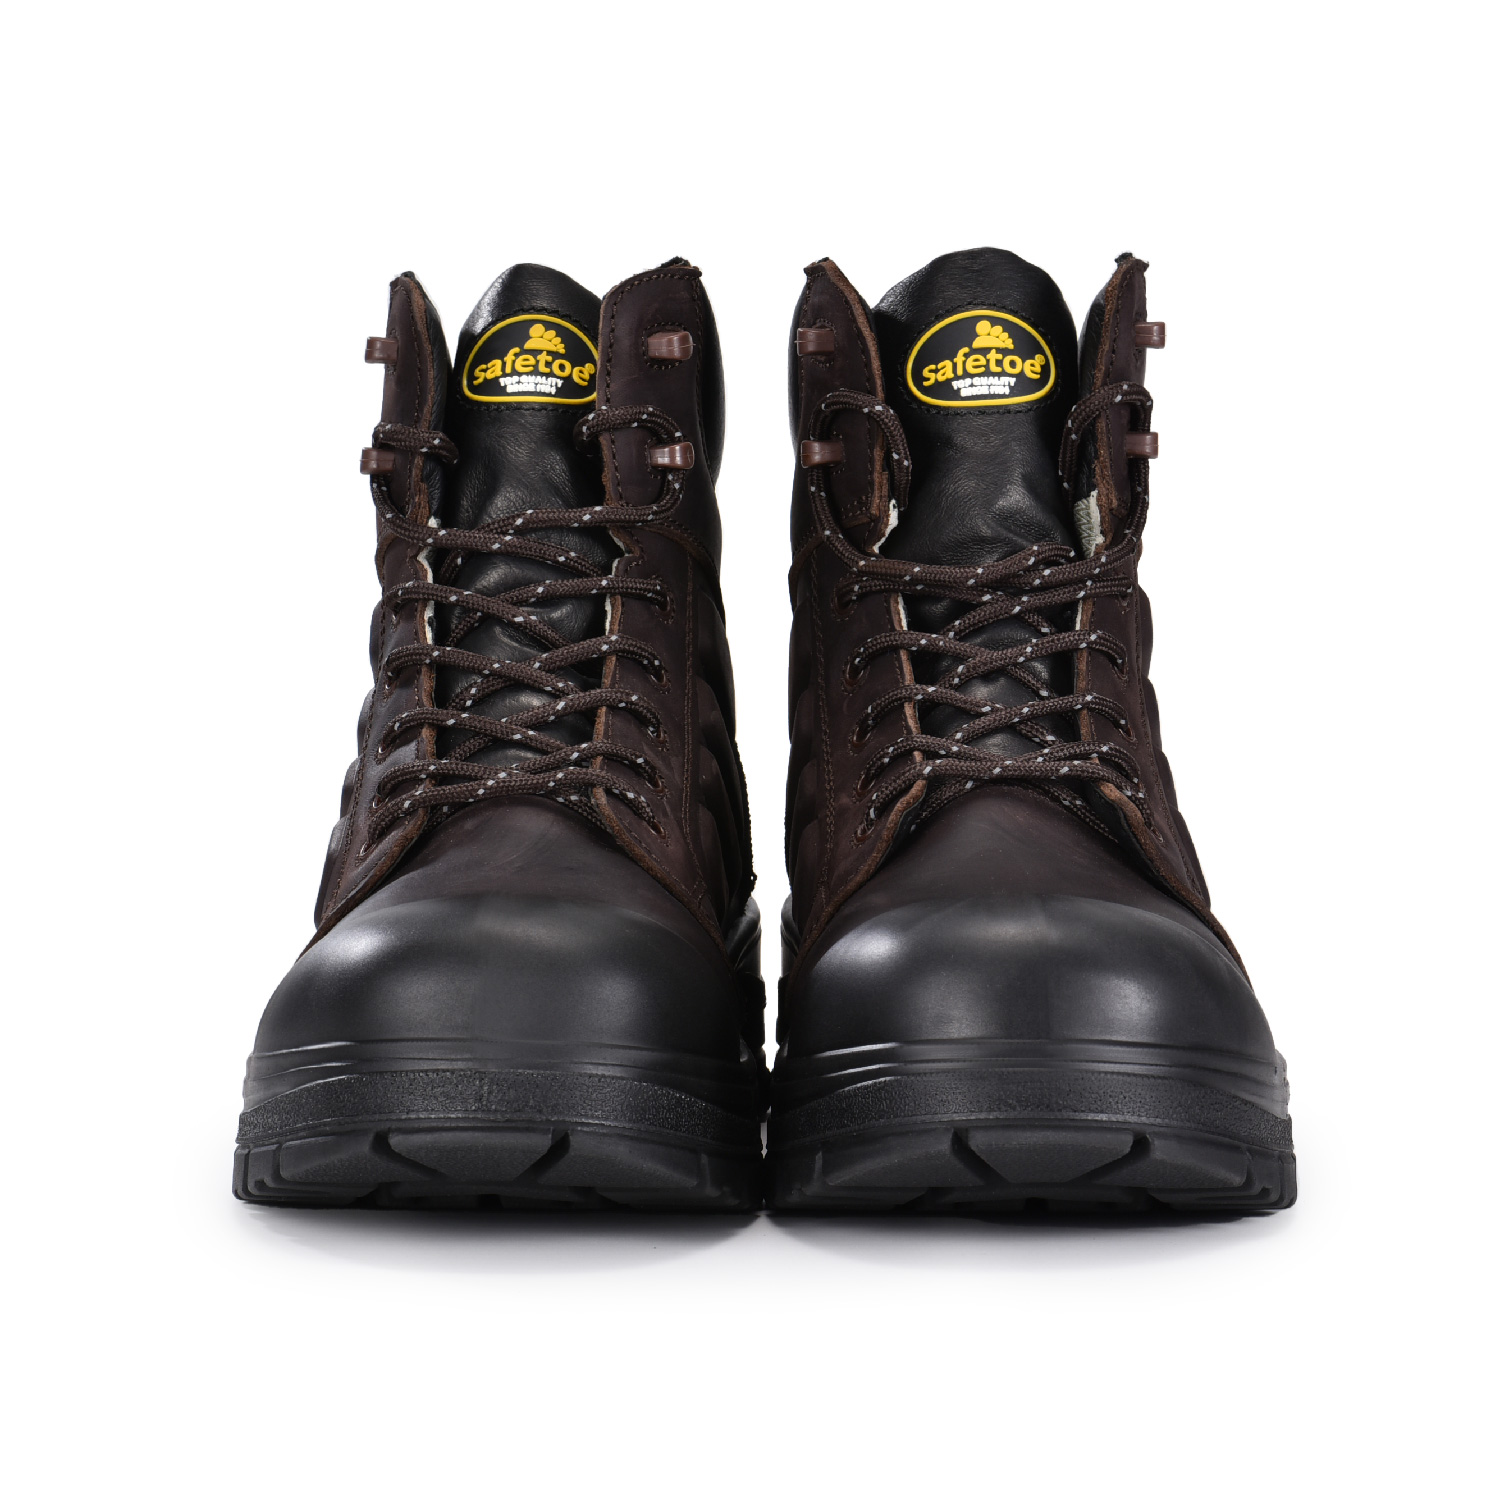 Waterproof Durable Leather Lace Up Work Boots for Me M-8558